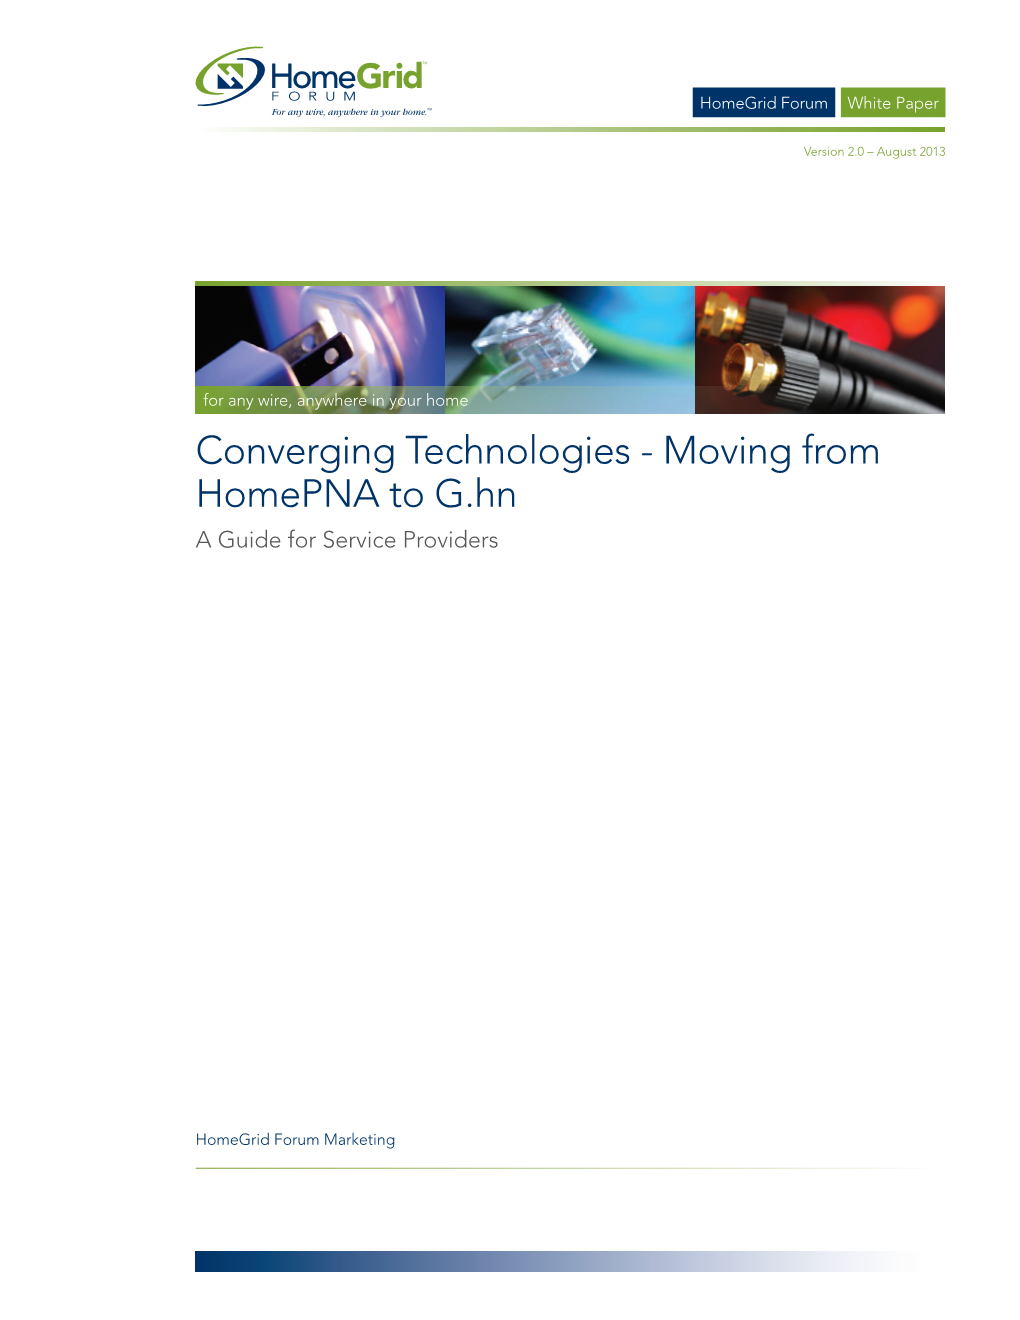 Converging Technologies - Moving from Homepna to G.Hn a Guide for Service Providers